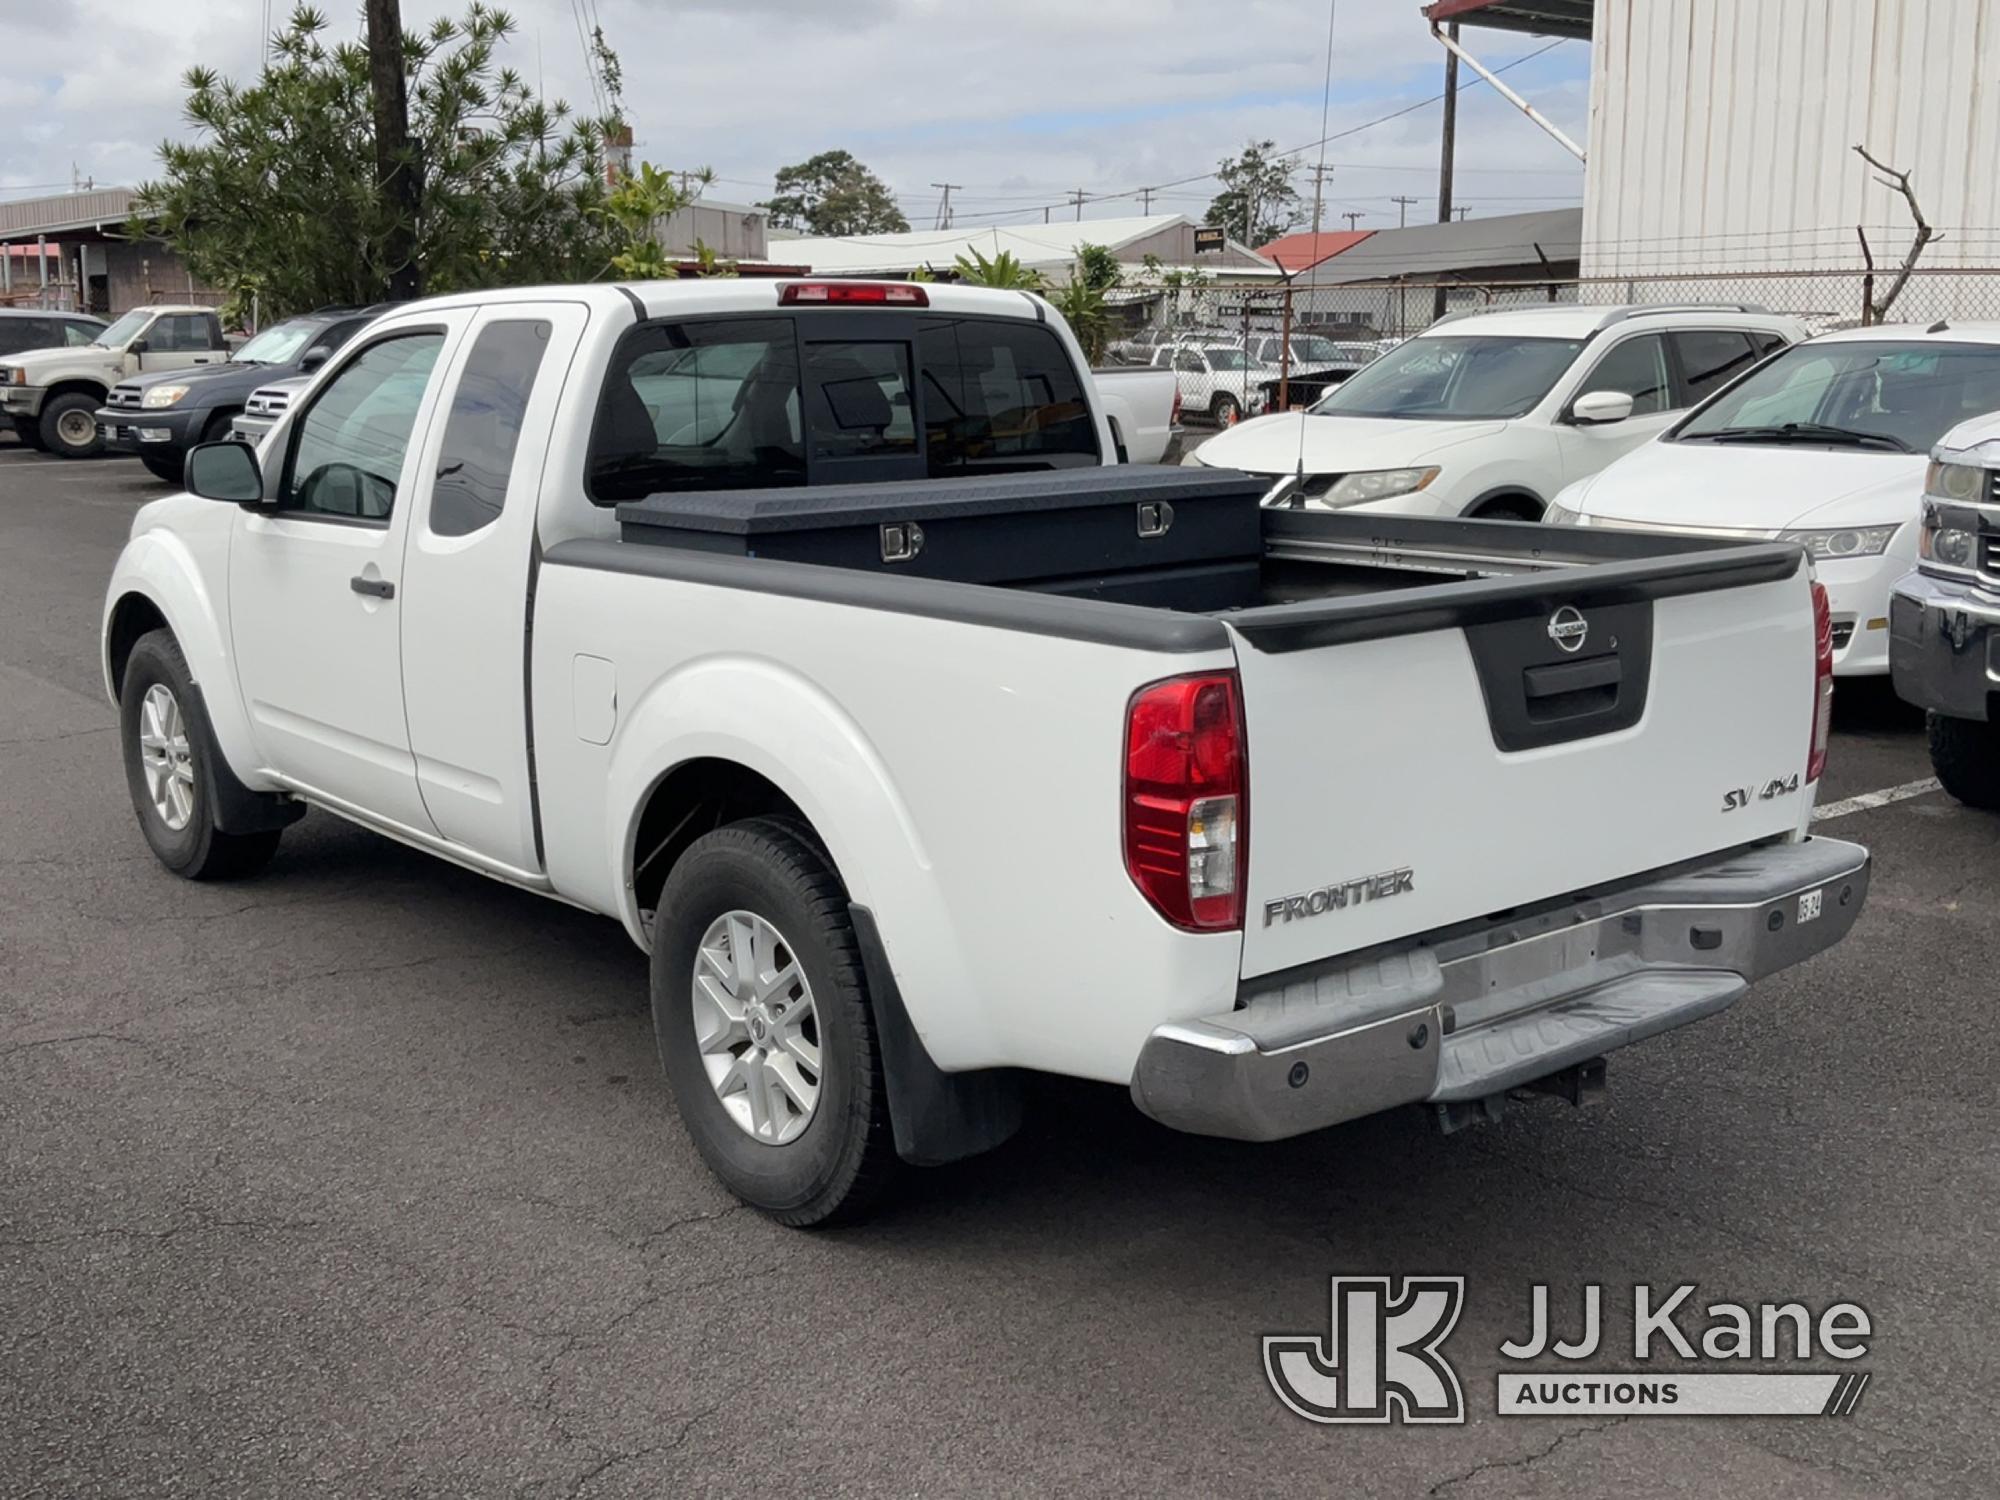 (Hilo, HI) 2017 Nissan Frontier 4x4 Extended Cab Pickup Truck, Radio Transmitter and Handset Not Inc